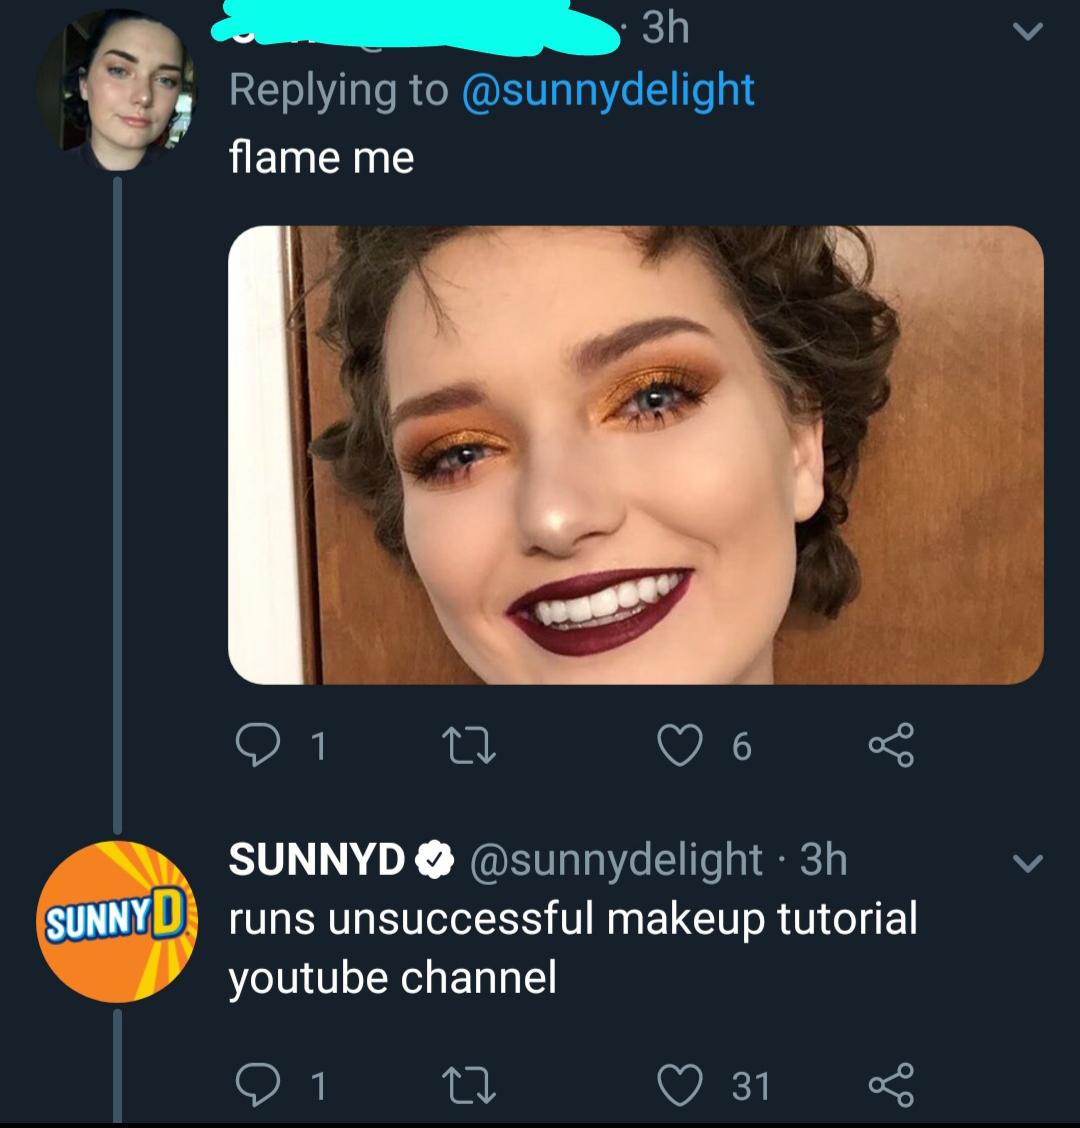 smile - 3h flame me on 22 6 o Sunnyd Sunnyd . 3h runs unsuccessful makeup tutorial youtube channel on 22 31 8